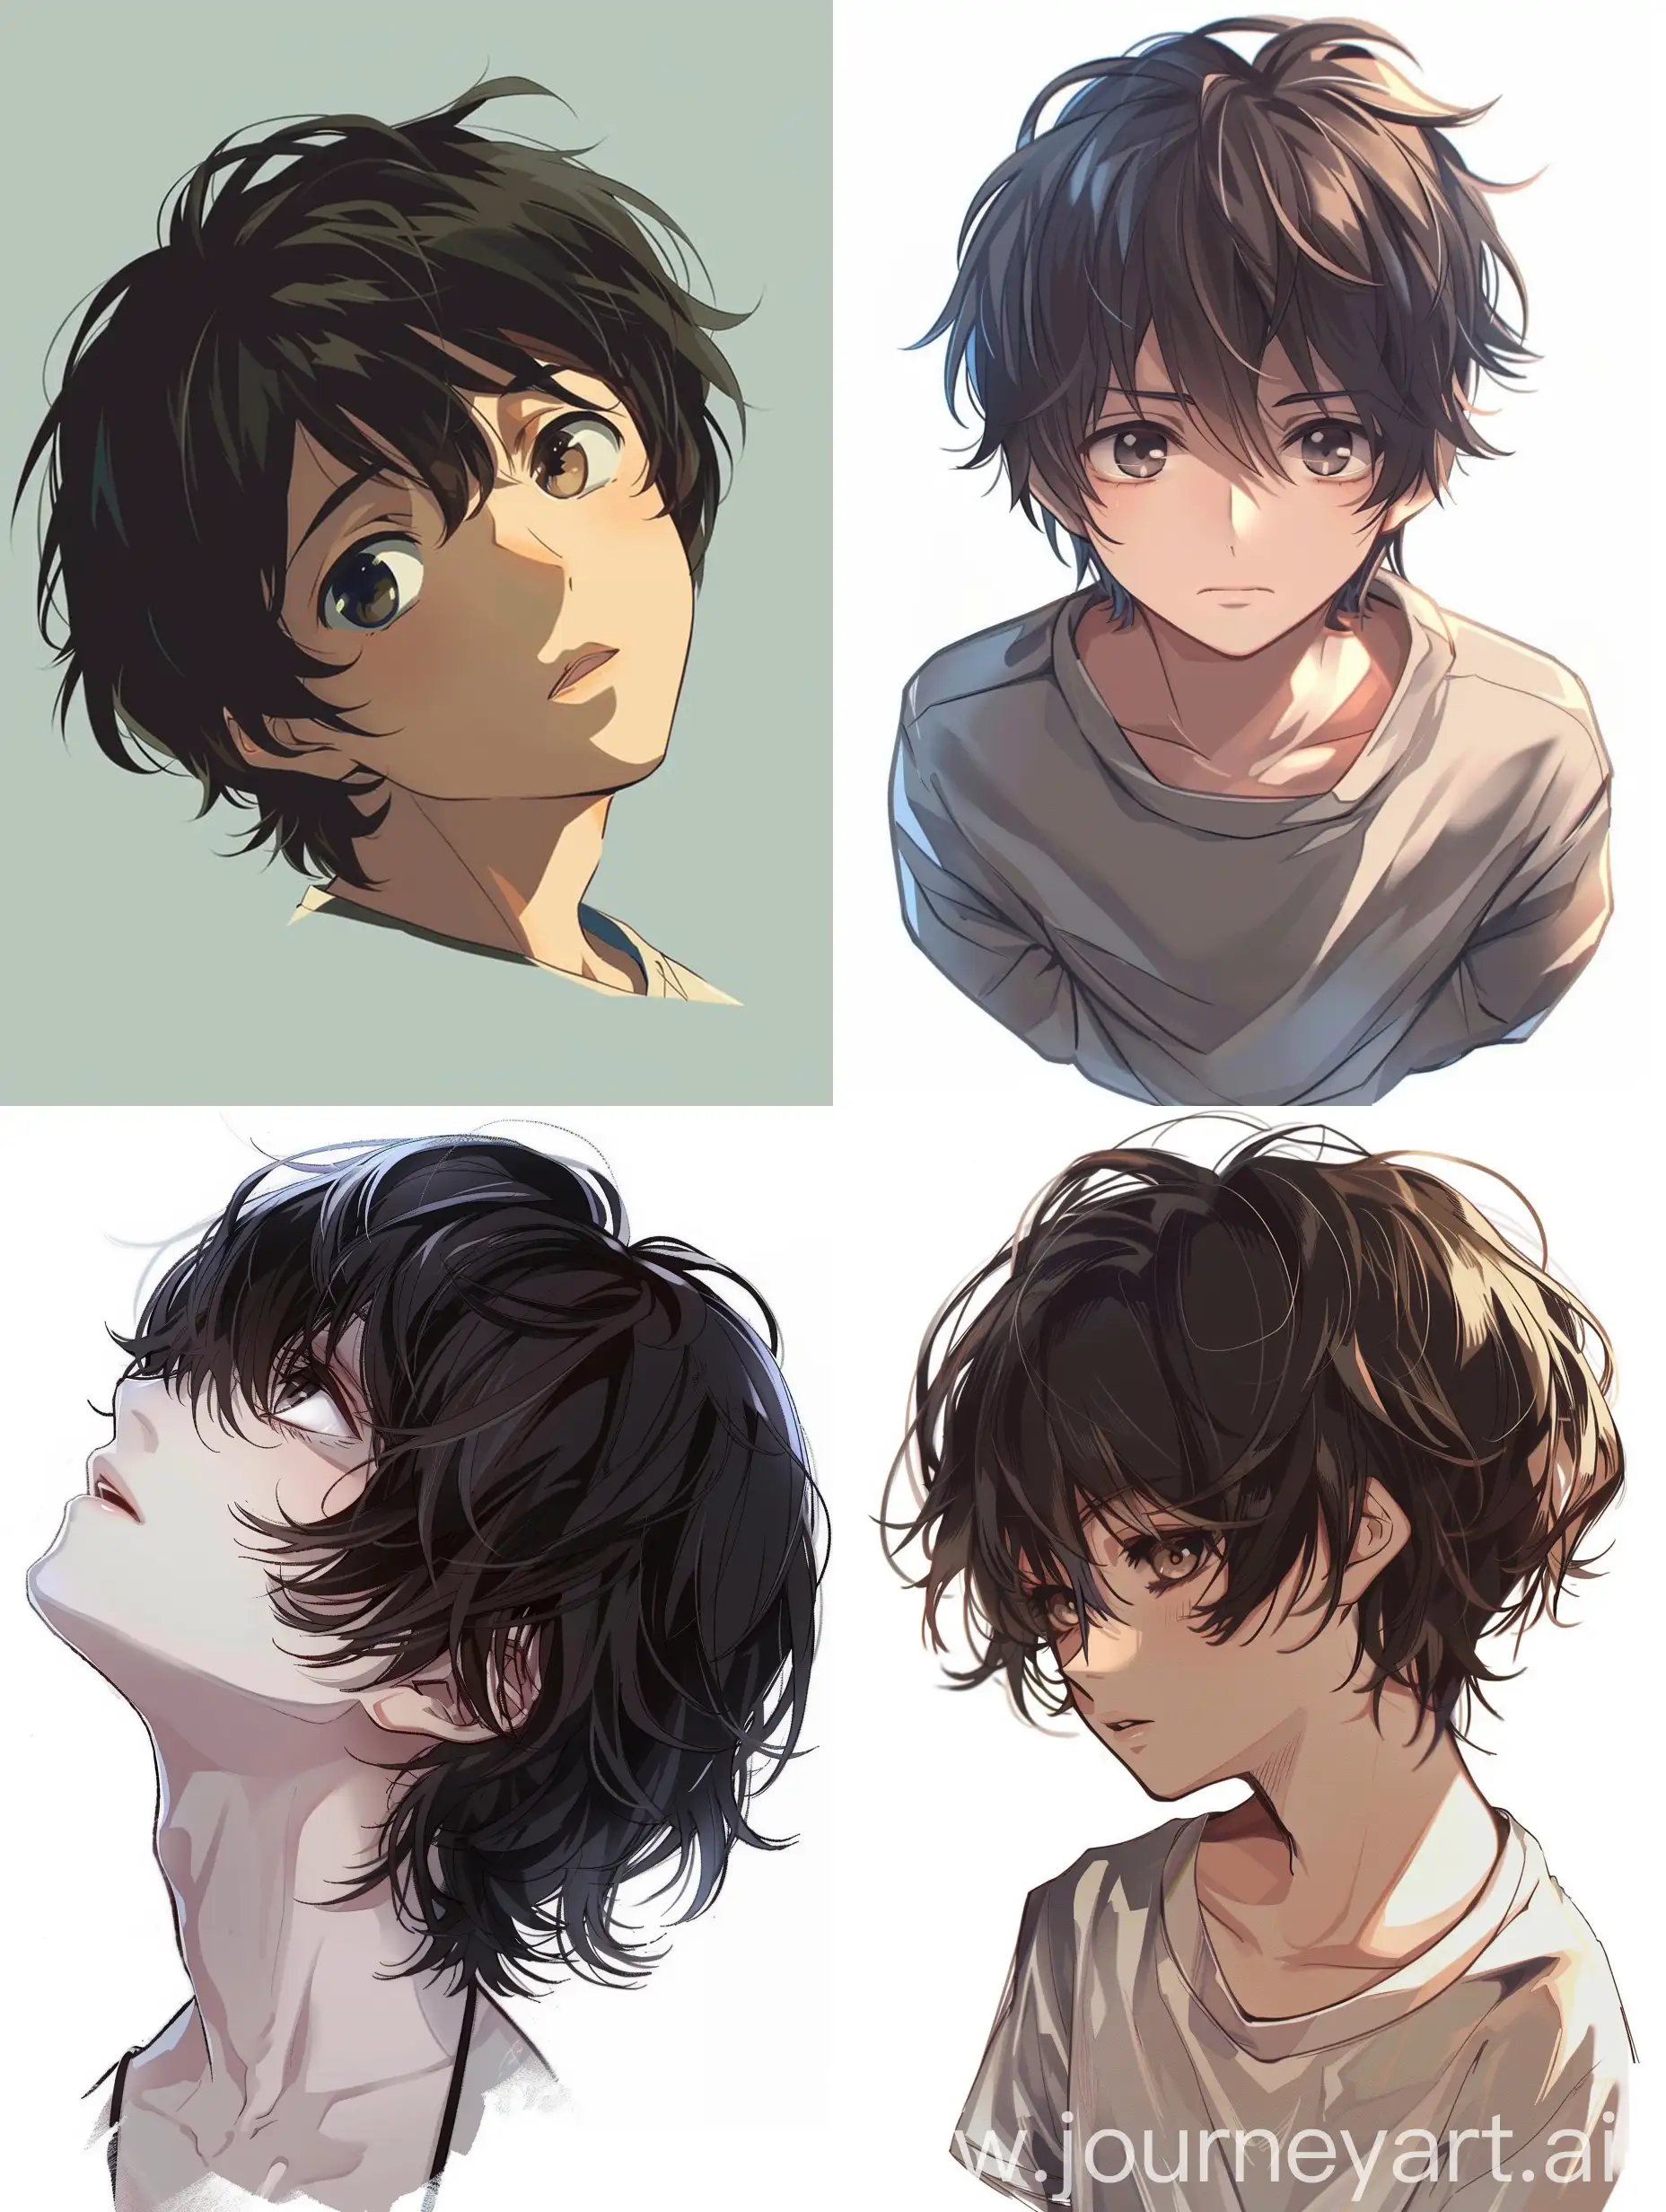 boy, dark hair, top view at an angle, anime style.